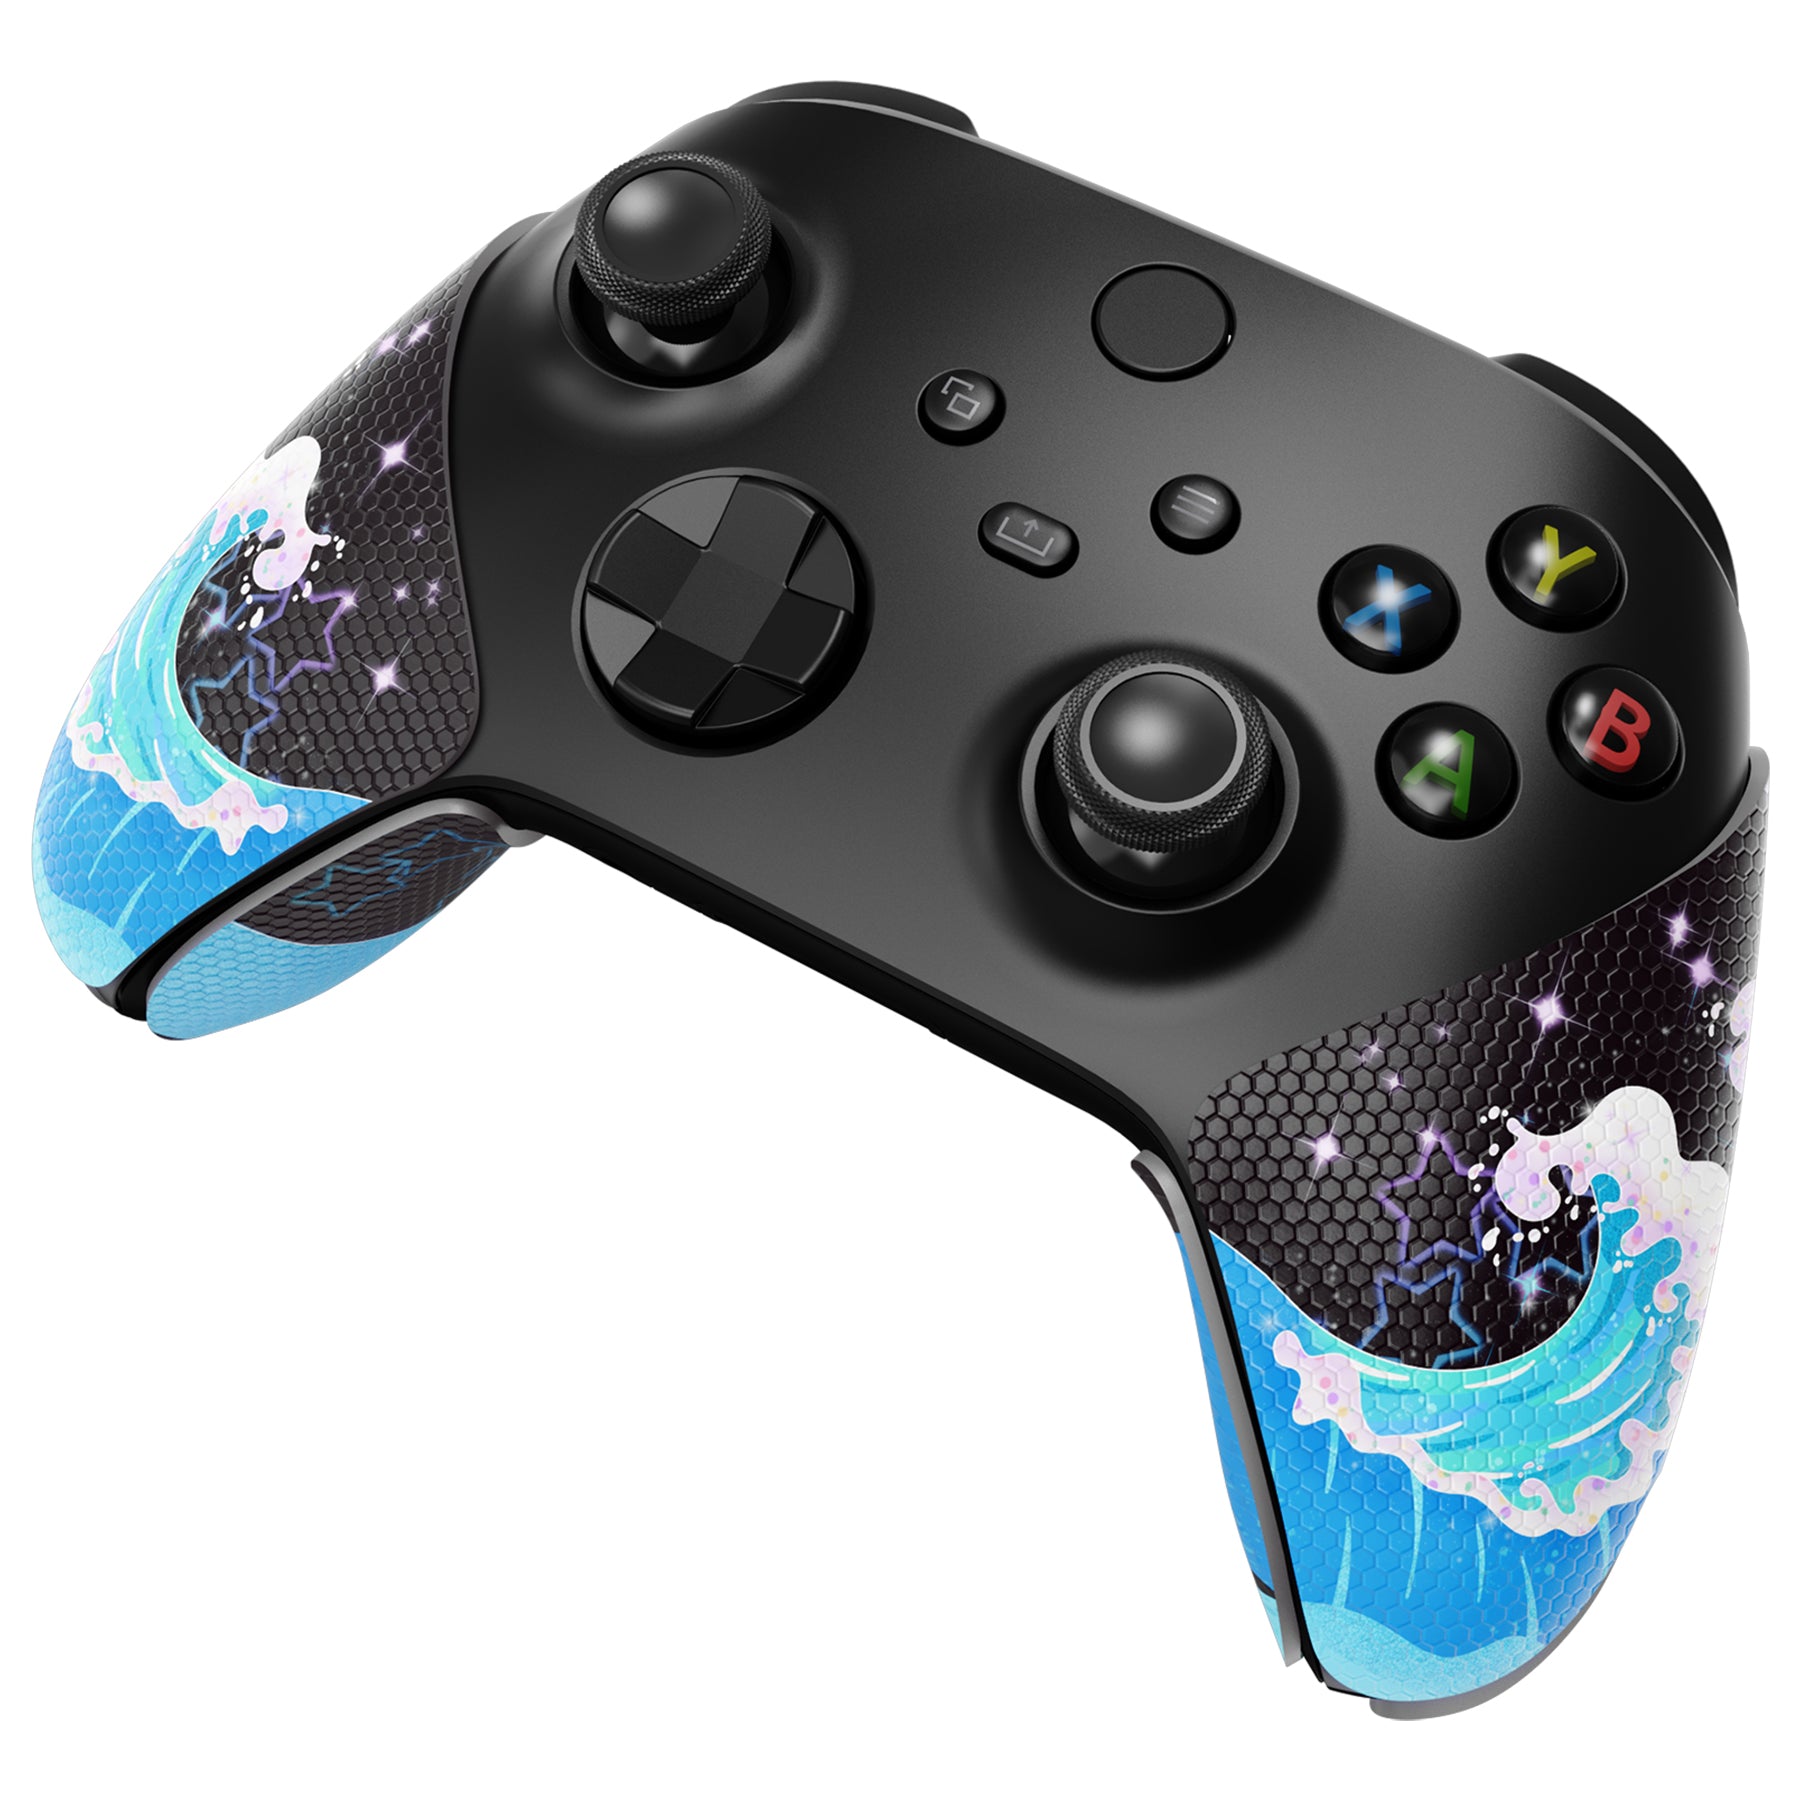 PlayVital Shimmering Waves Anti-Skid Sweat-Absorbent Controller Grip for Xbox Series X/S Controller, Professional Textured Soft Rubber Pads Handle Grips for Xbox Series X/S Controller - X3PJ032 PlayVital